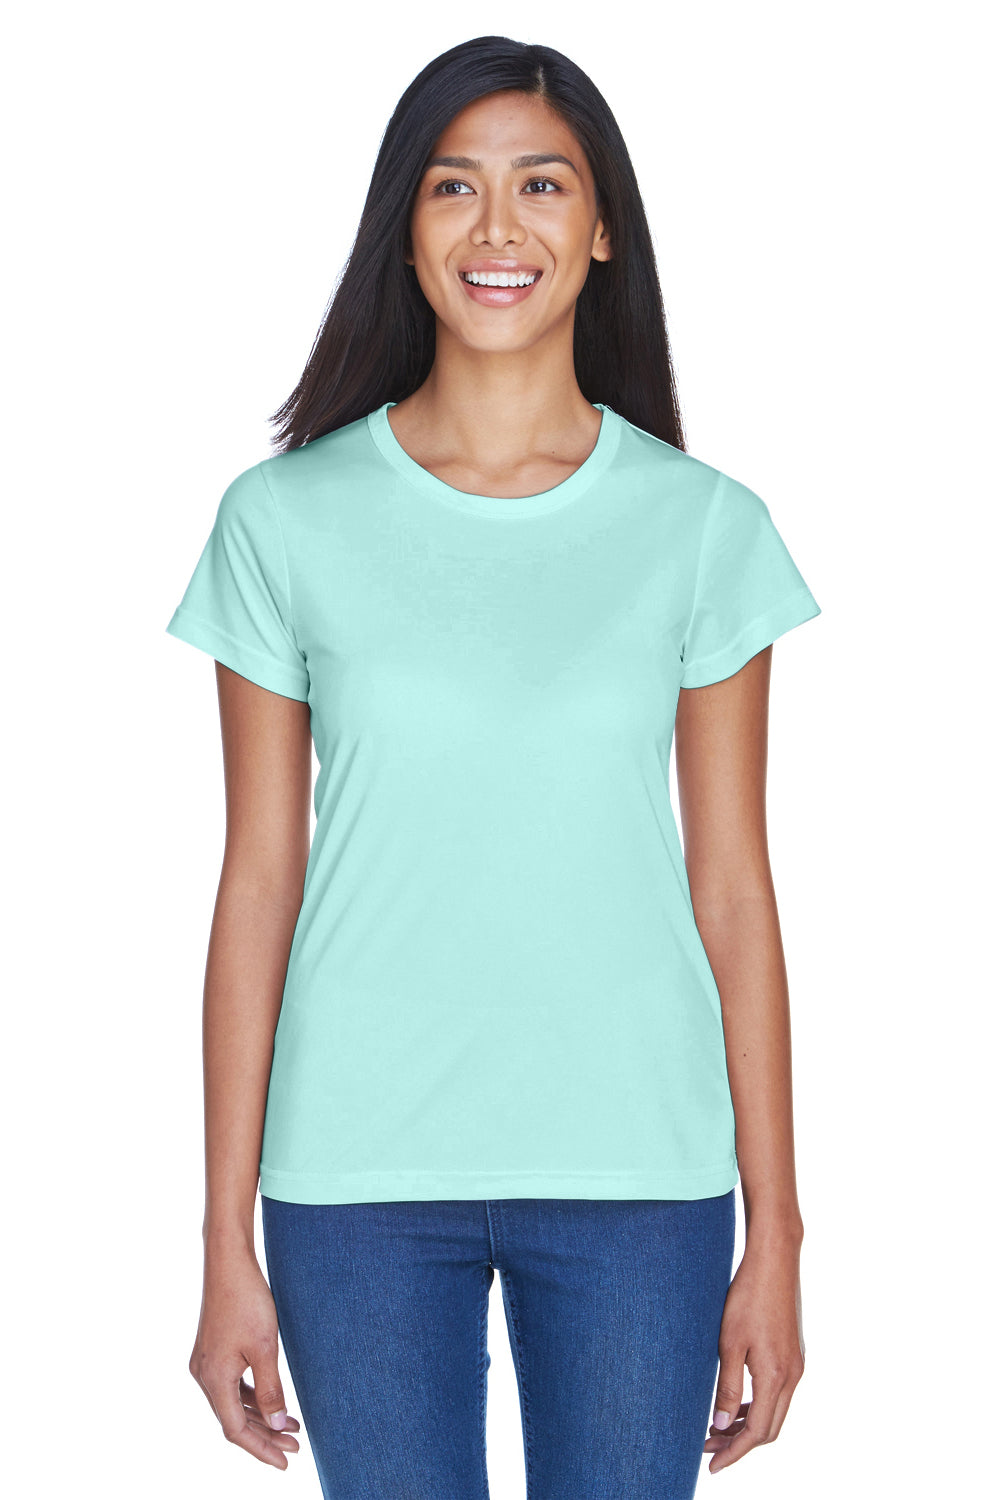 UltraClub 8420L Womens Cool & Dry Performance Moisture Wicking Short Sleeve Crewneck T-Shirt Sea Frost Green Front